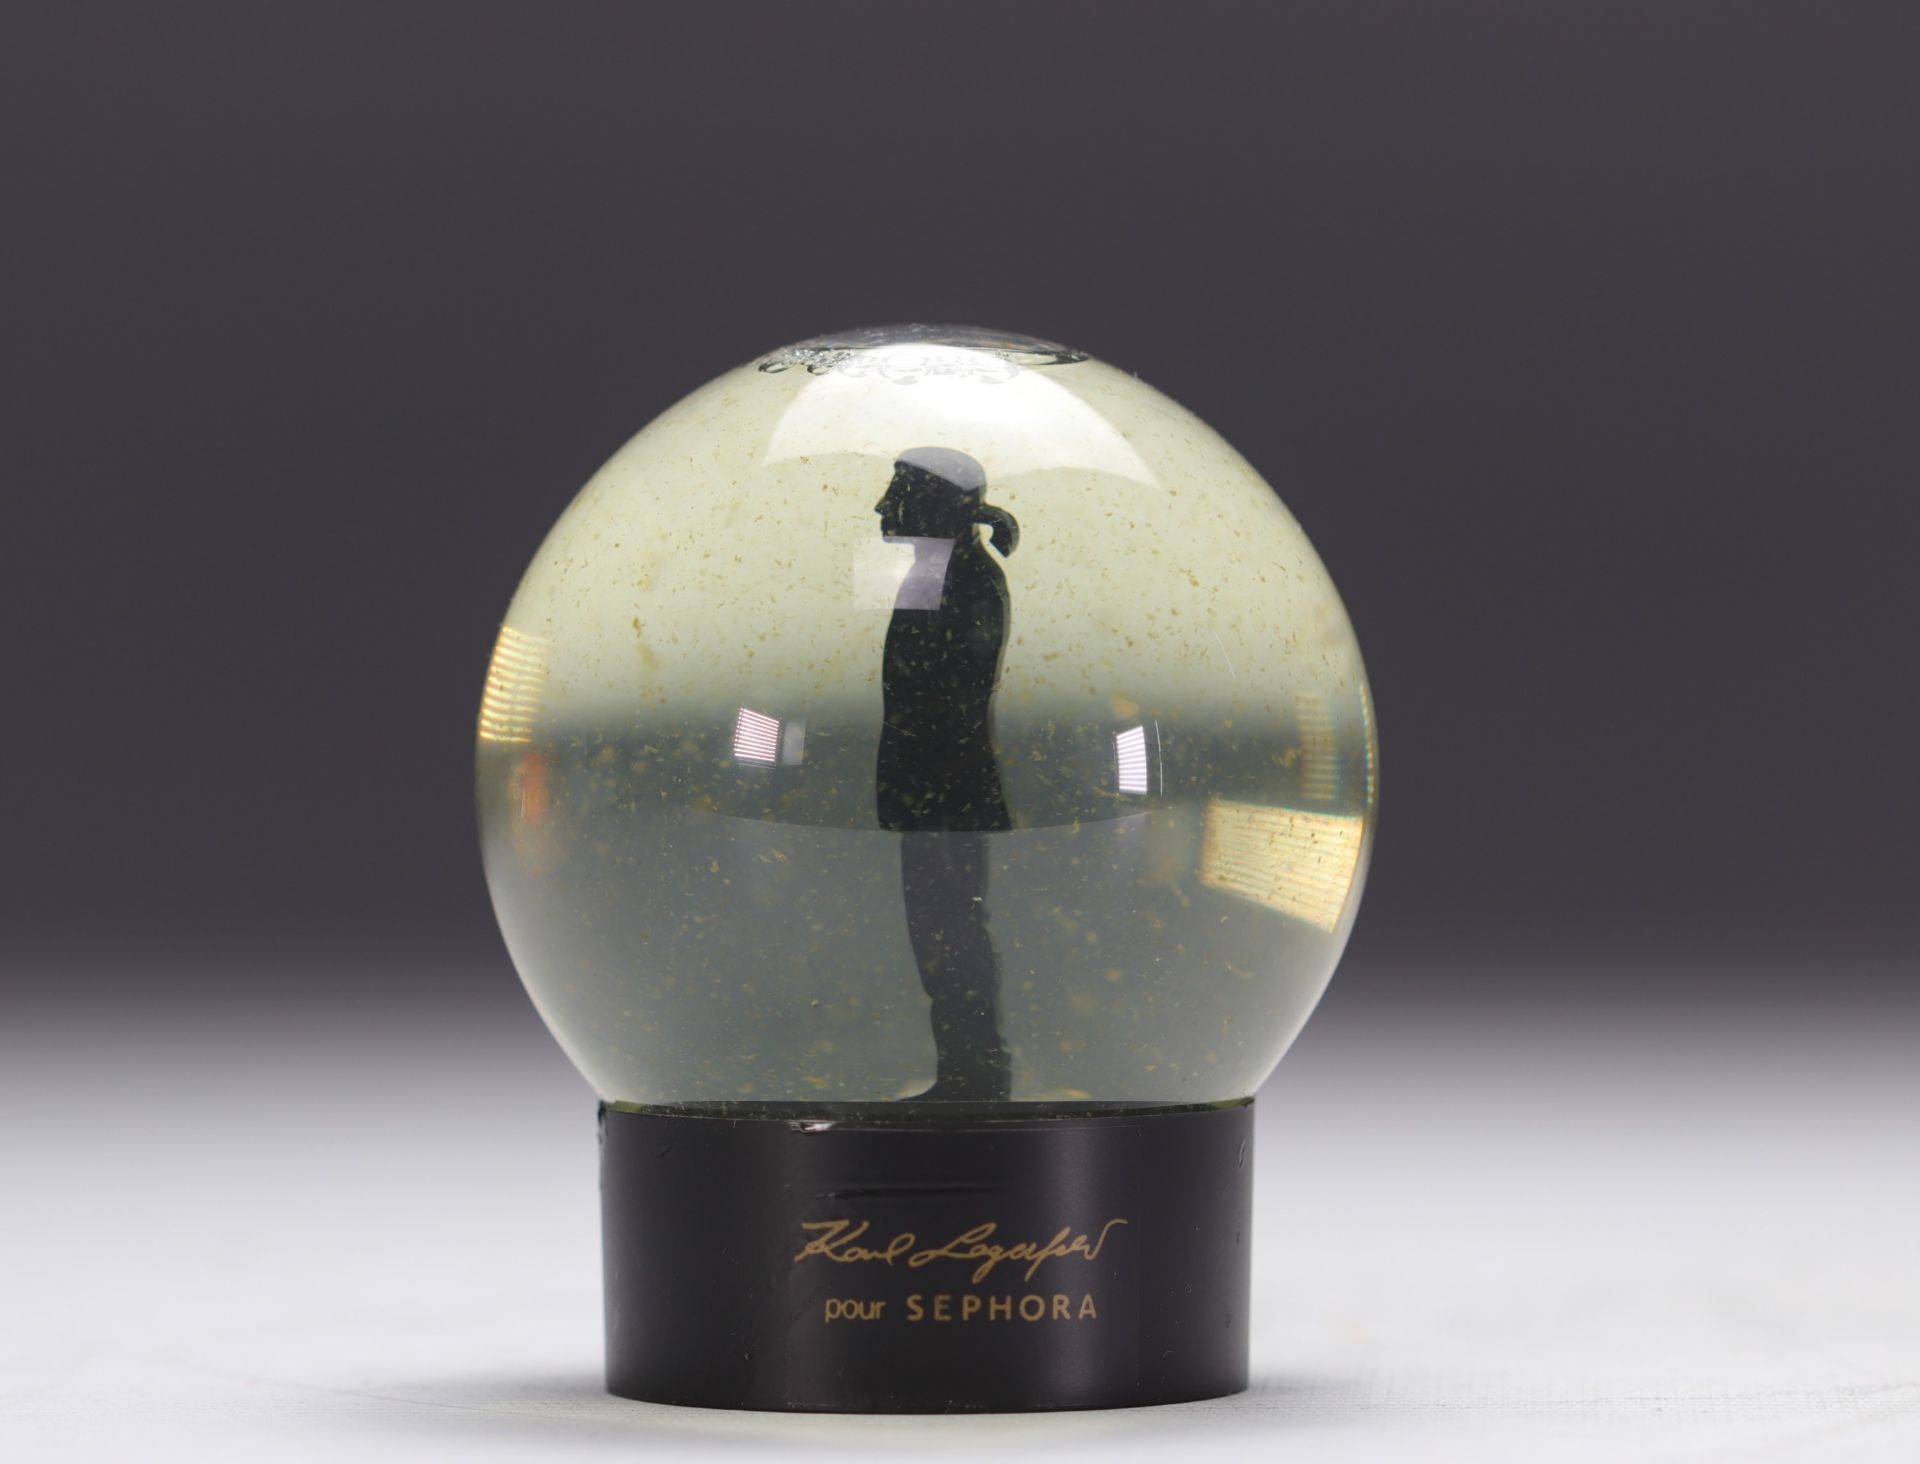 Karl Lagerfeld. "My great luxury is not having to justify to justify myself to anyone. Snow globe a - Image 2 of 2